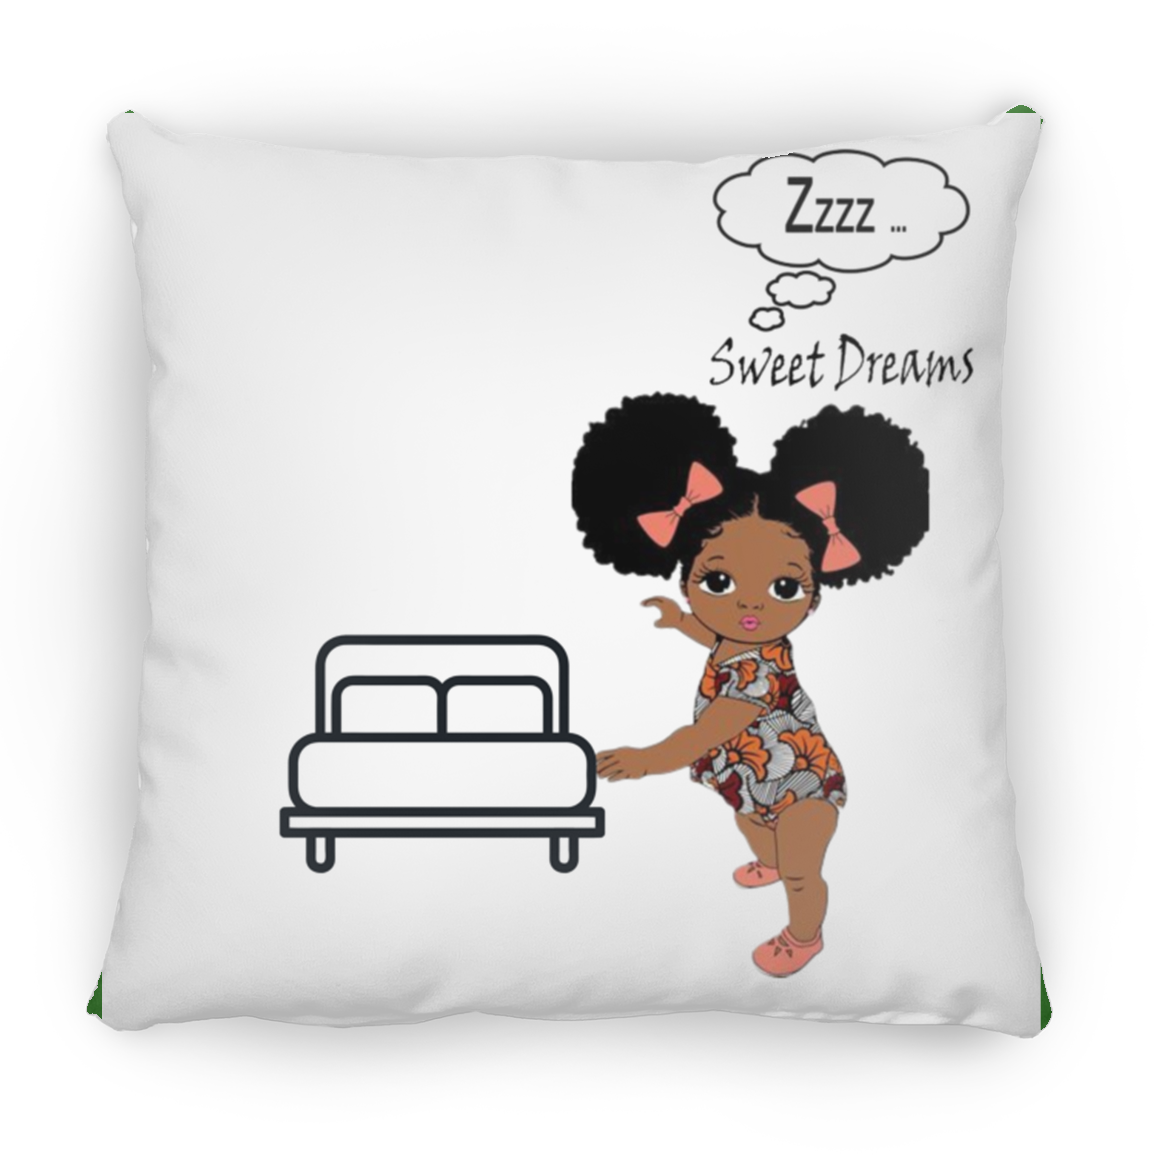 Zzzz Sweet Dreams Large Square Pillow Bedding for little girl, Animated childrens nursery decor